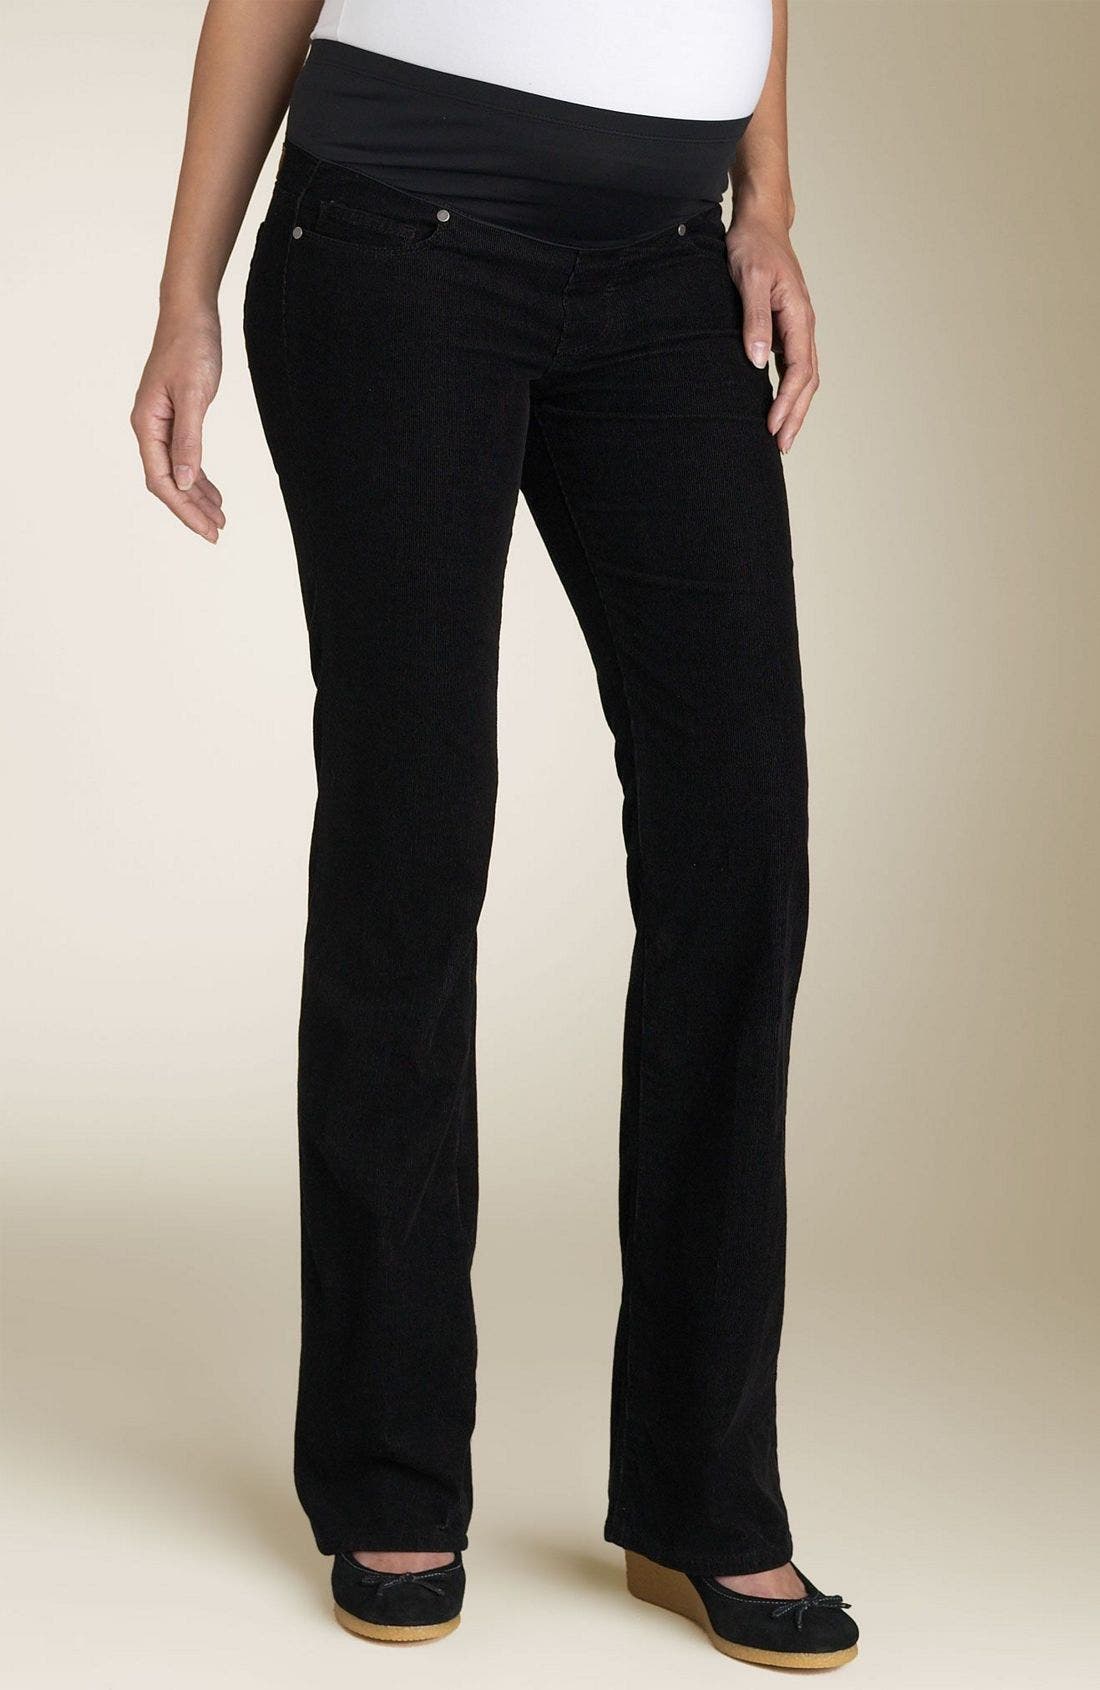 paige benedict canyon jeans